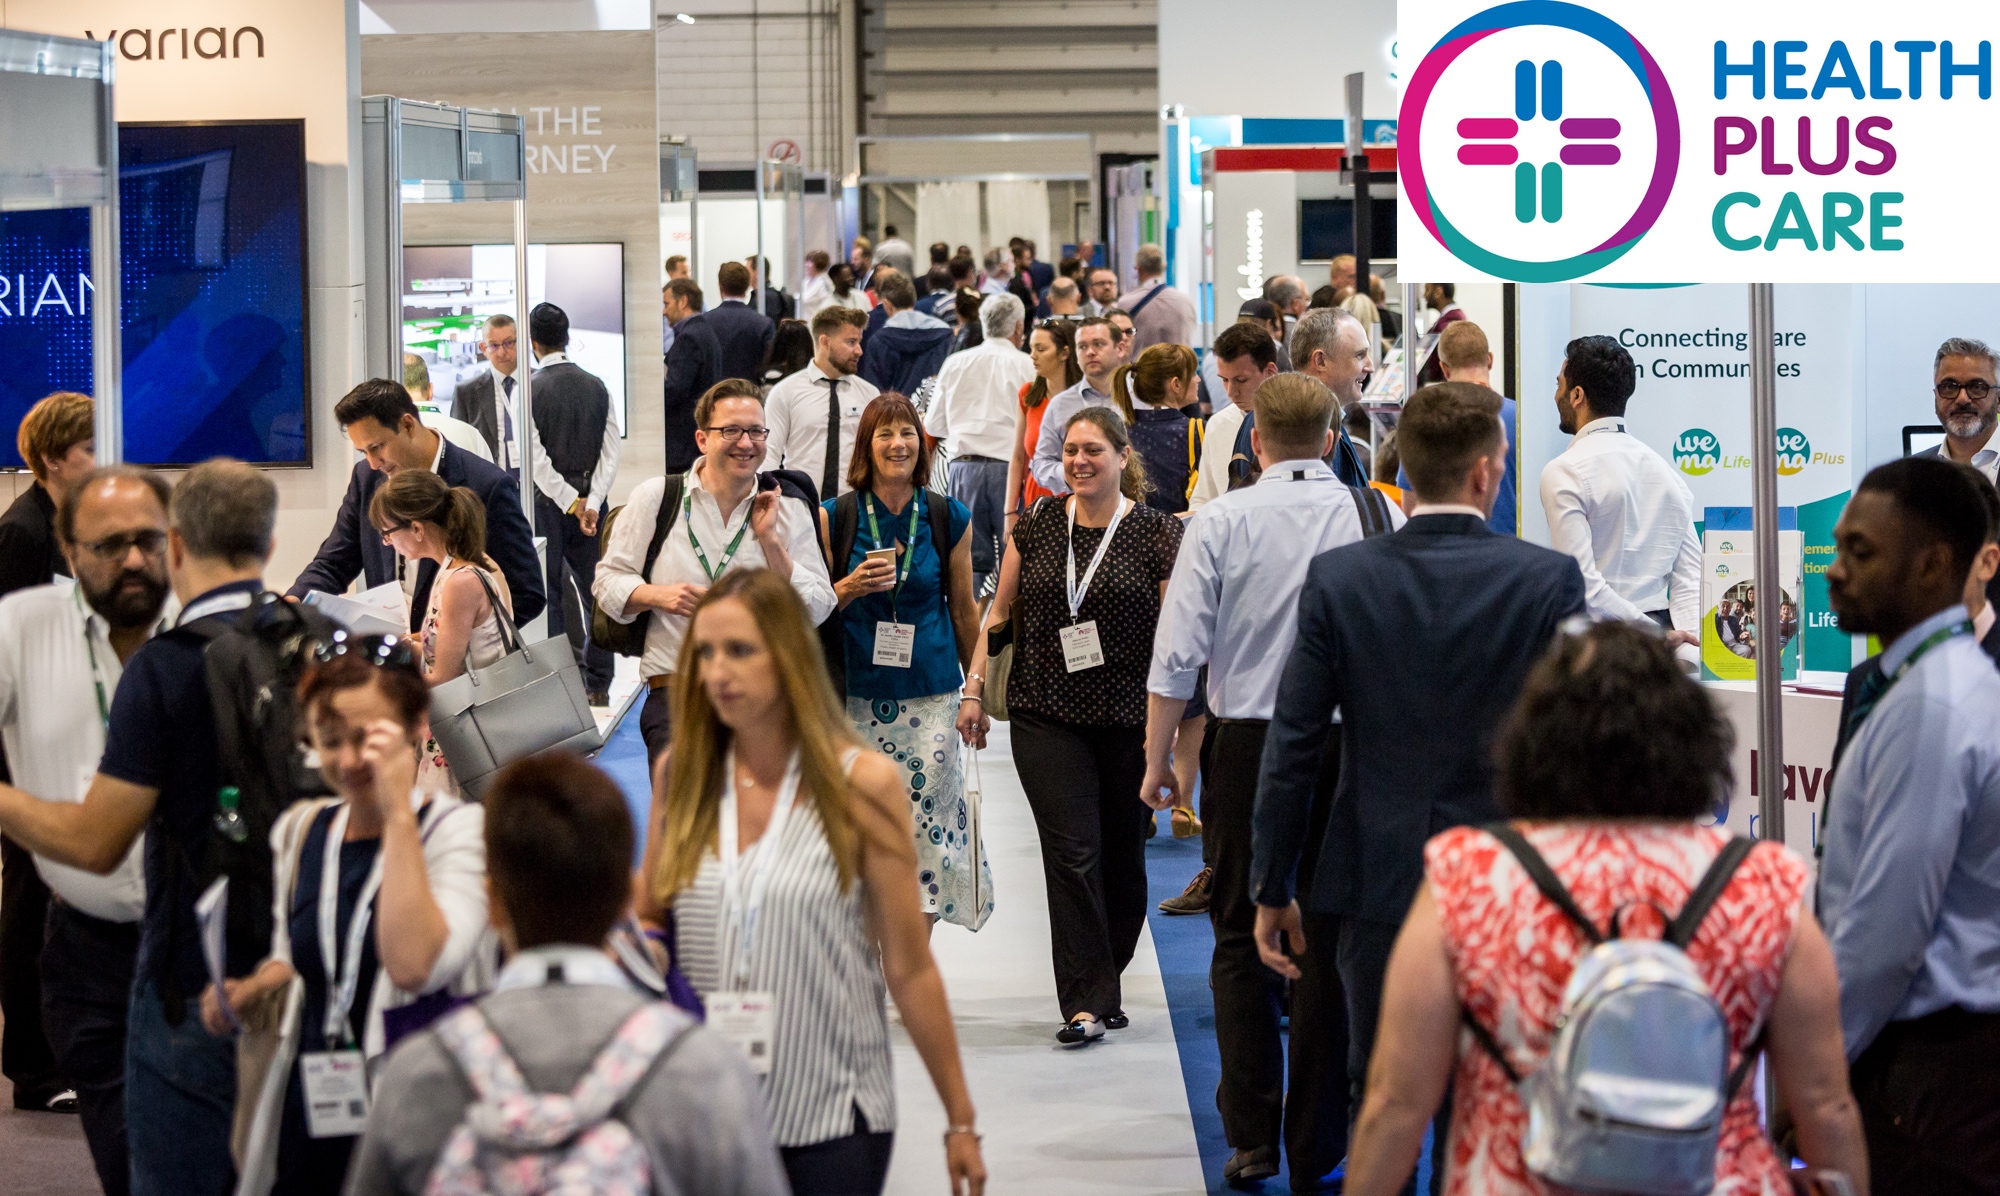 Definitive event for health and care in UK set for next week